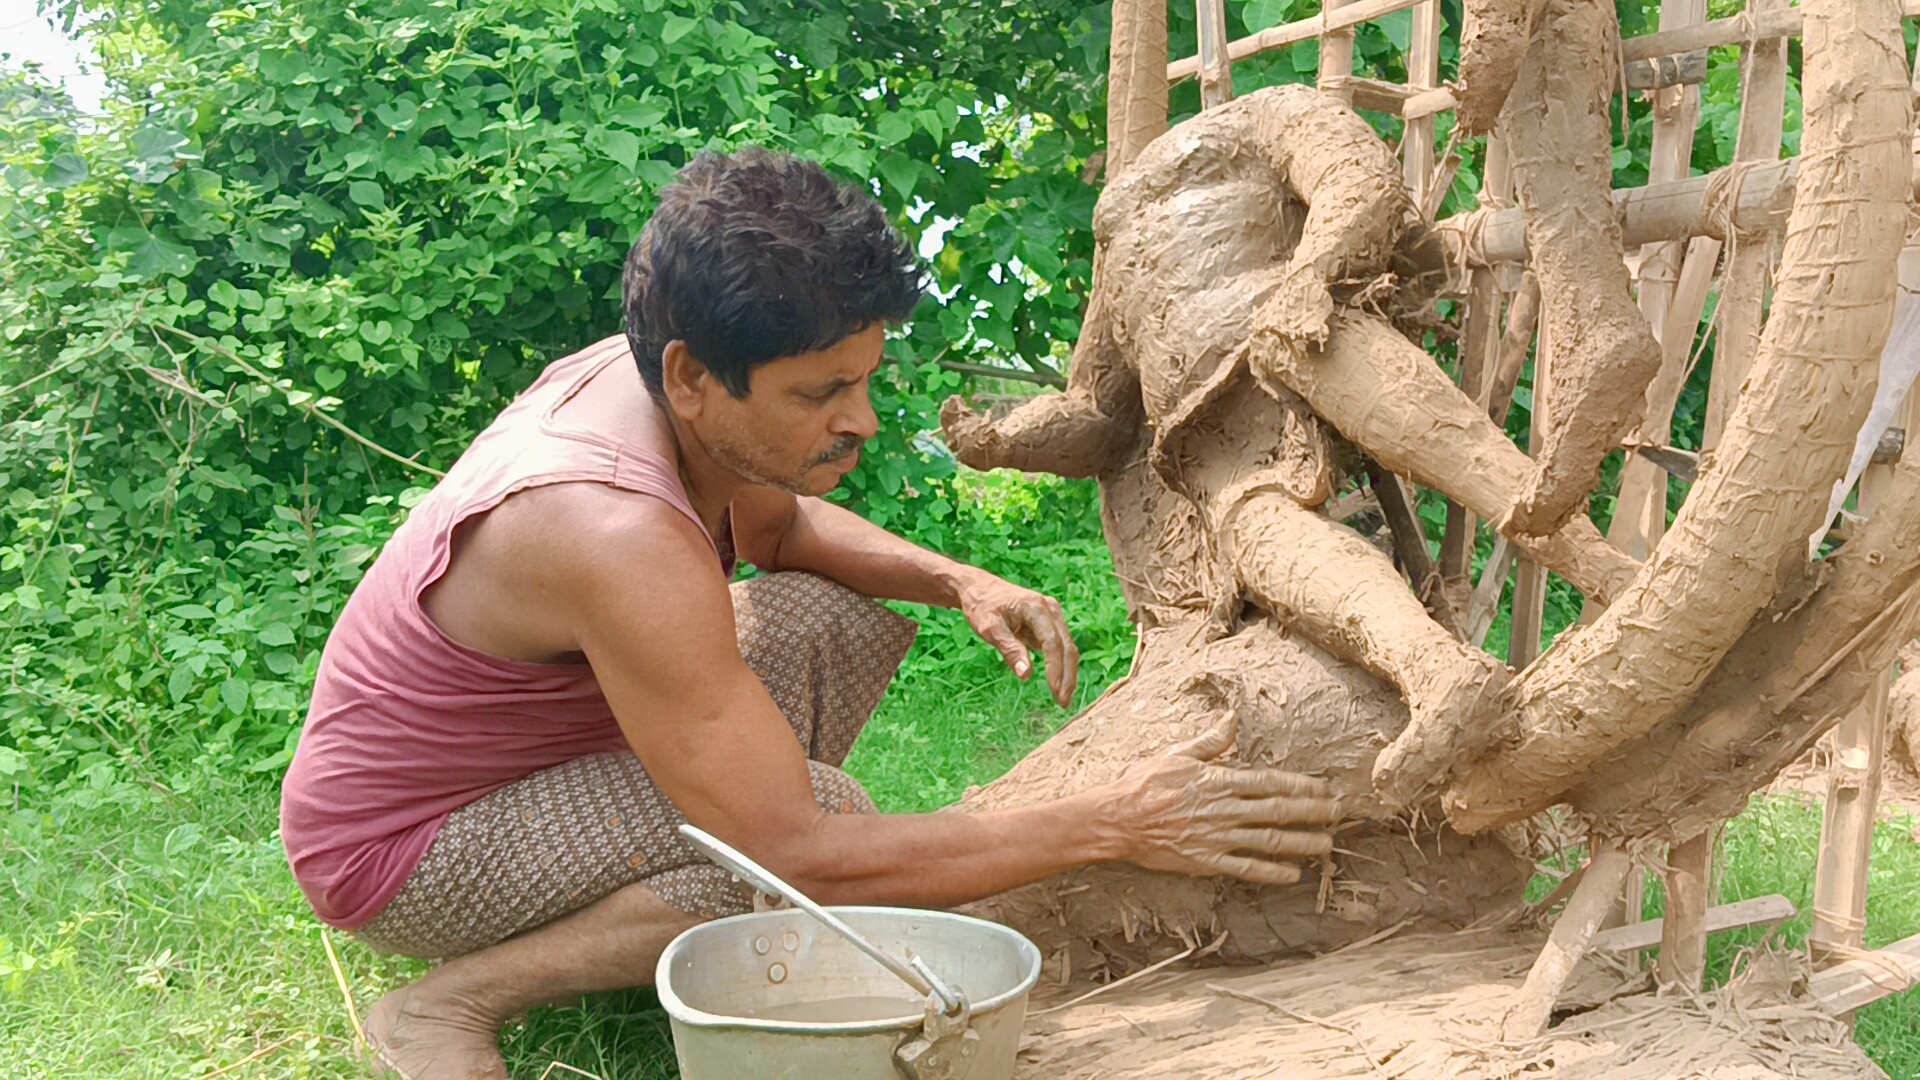 specially abled Bikash Bishal making idols since 30 years in Jhargram